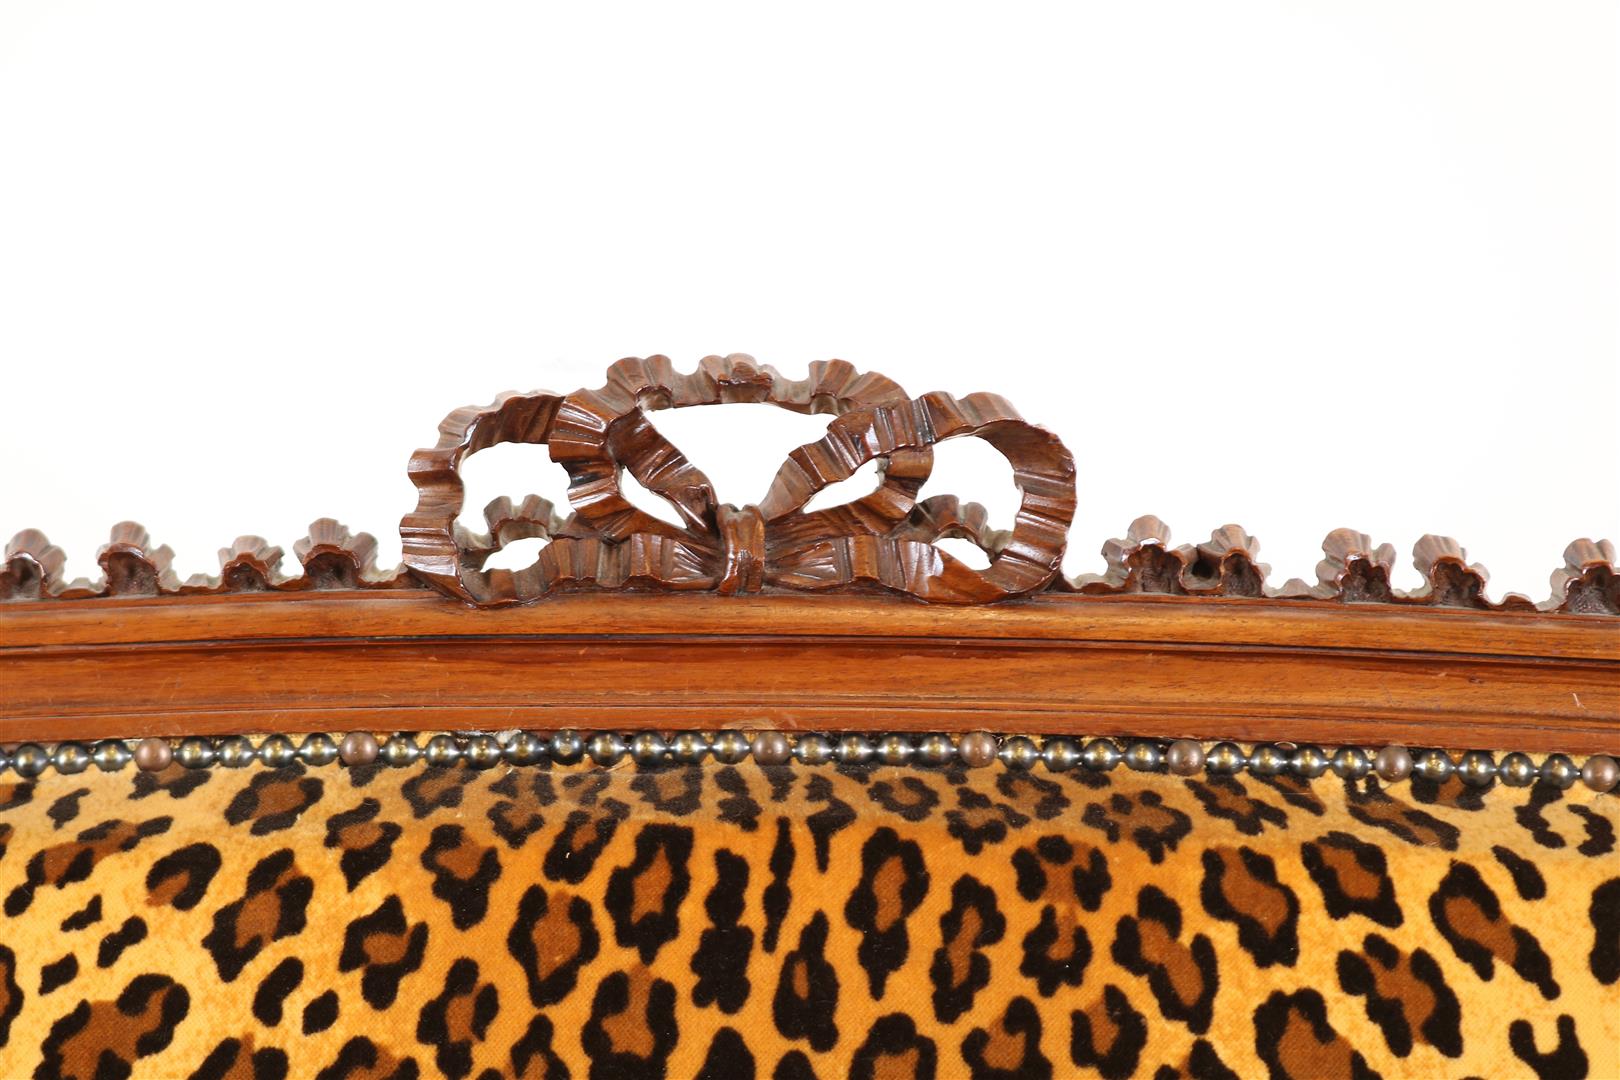 Walnut Louis XVI style double sofa with bow crown and leopard fabric upholstery, 103 x 130 x 58 cm. - Image 2 of 5